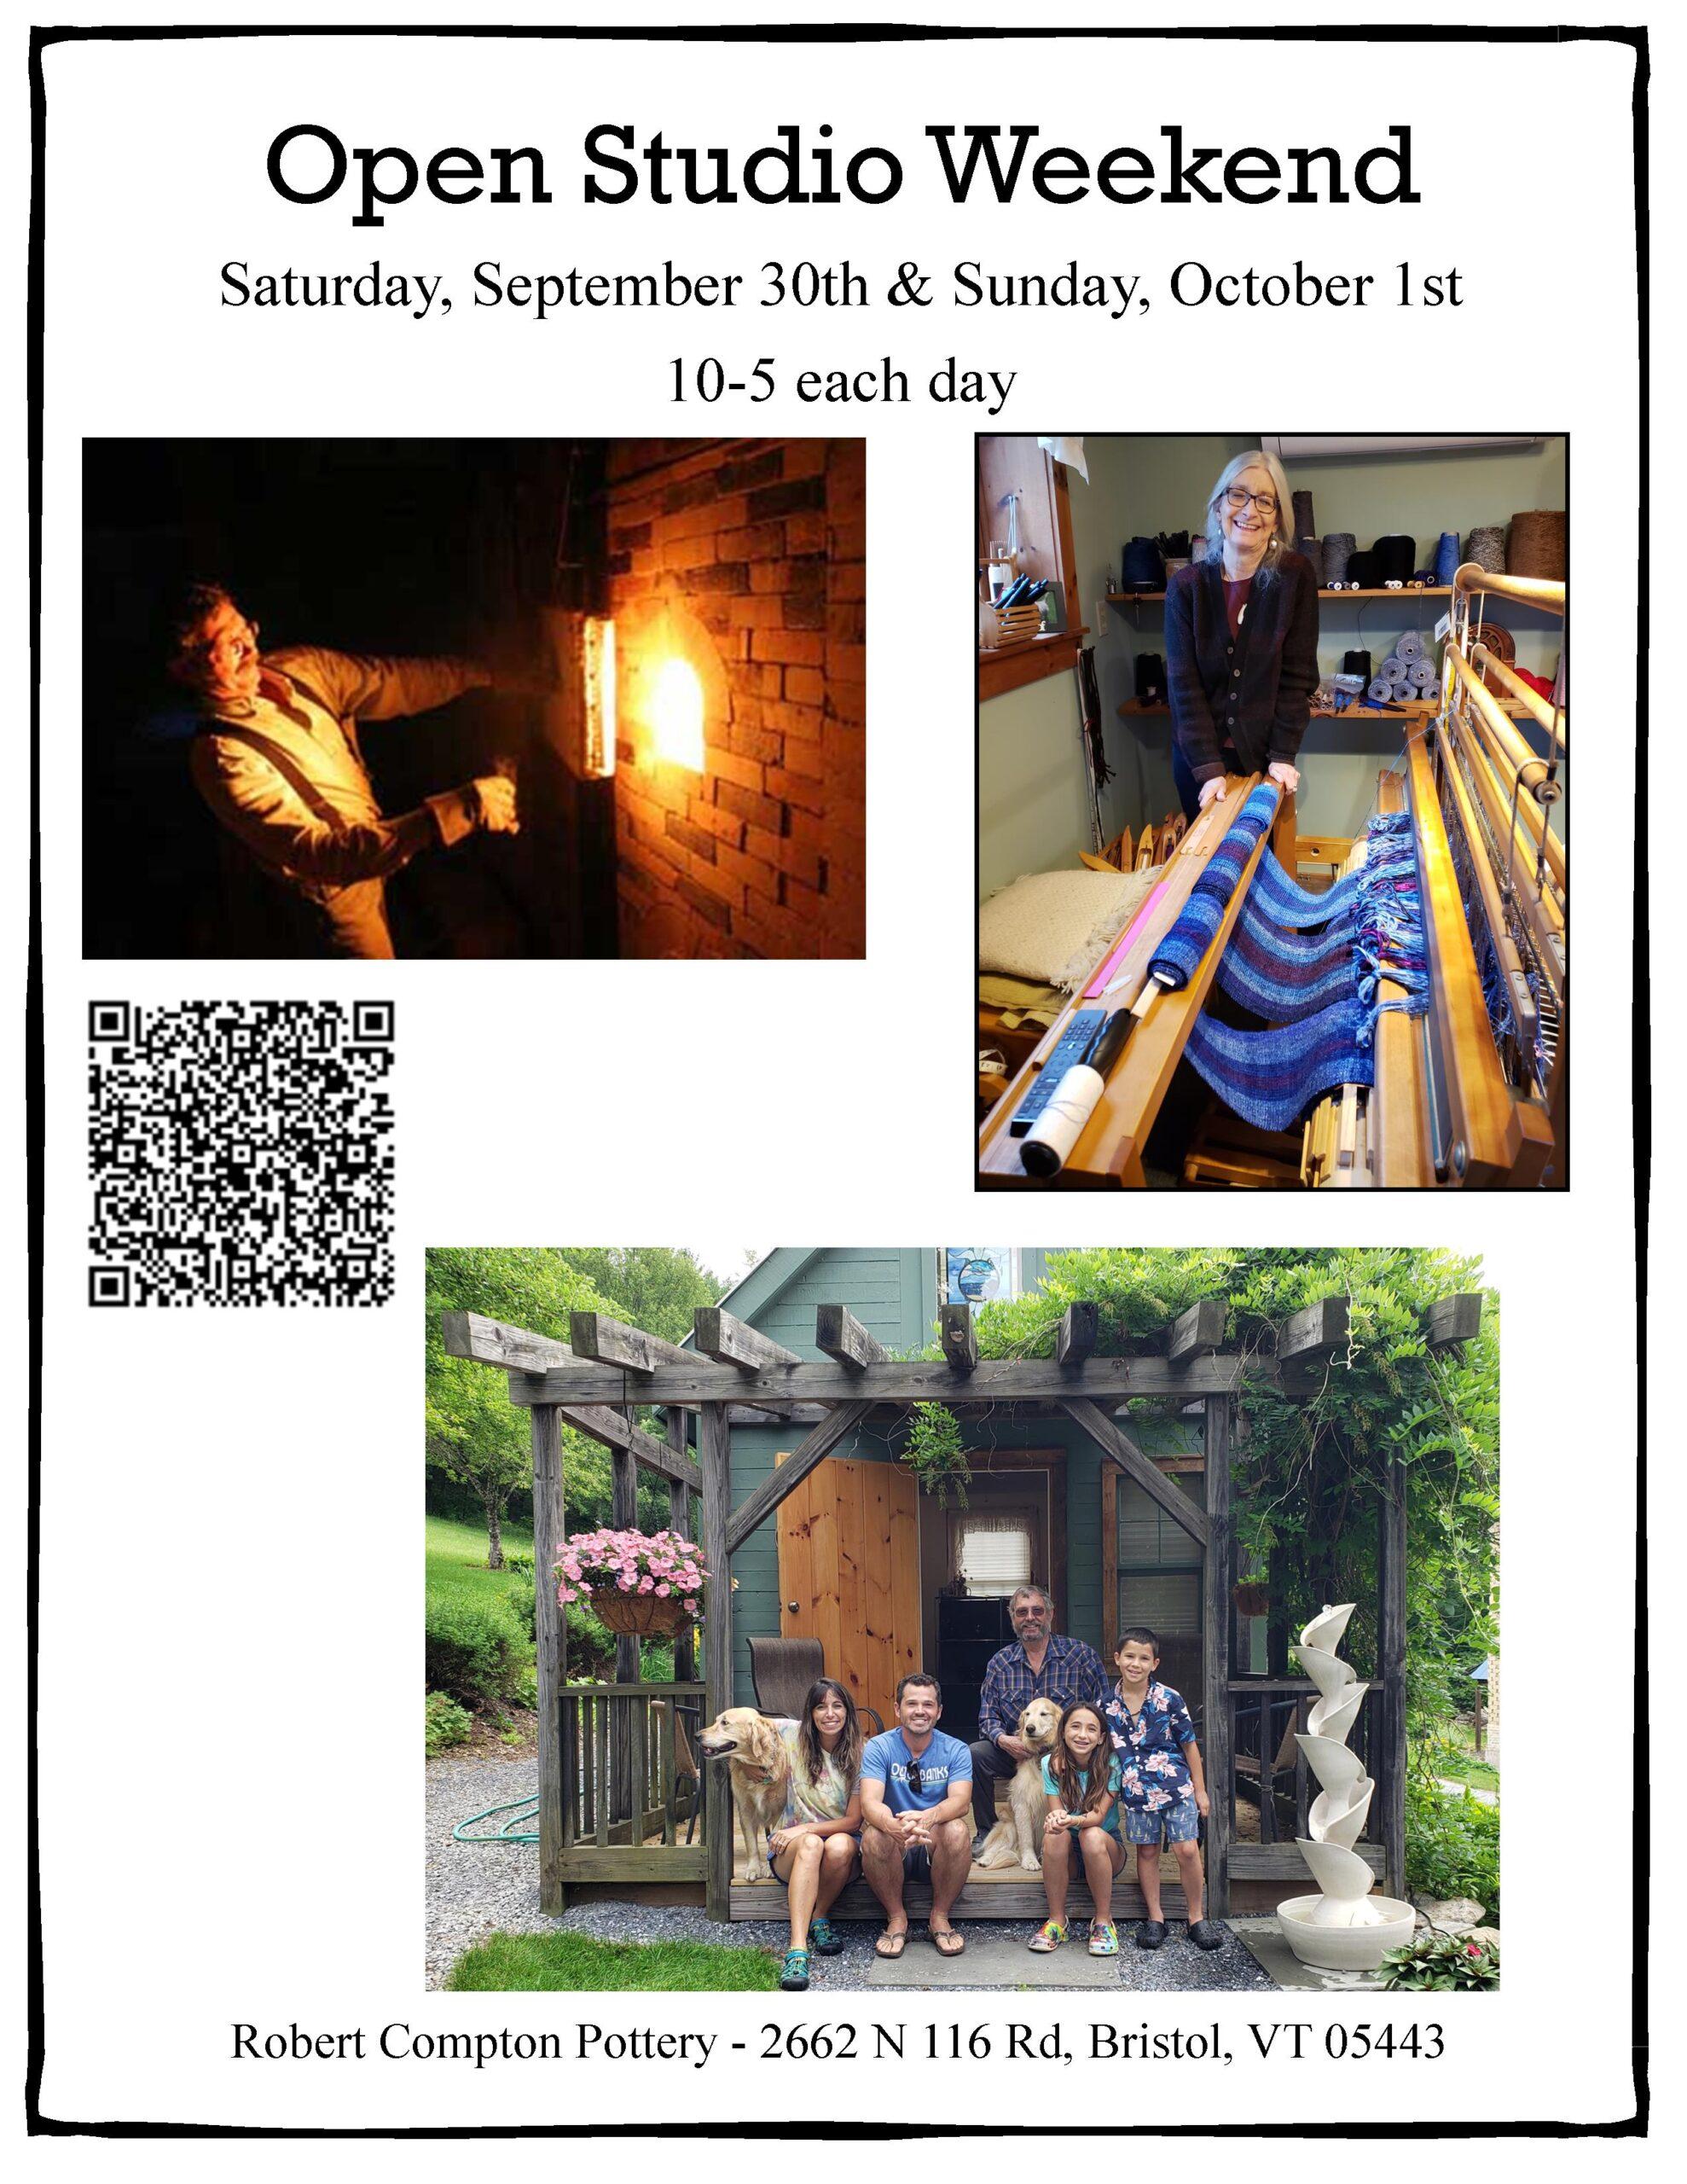 Open Studio Weekend, Saturday, September 30th & Sunday, October 1st, from 10-5 each day.